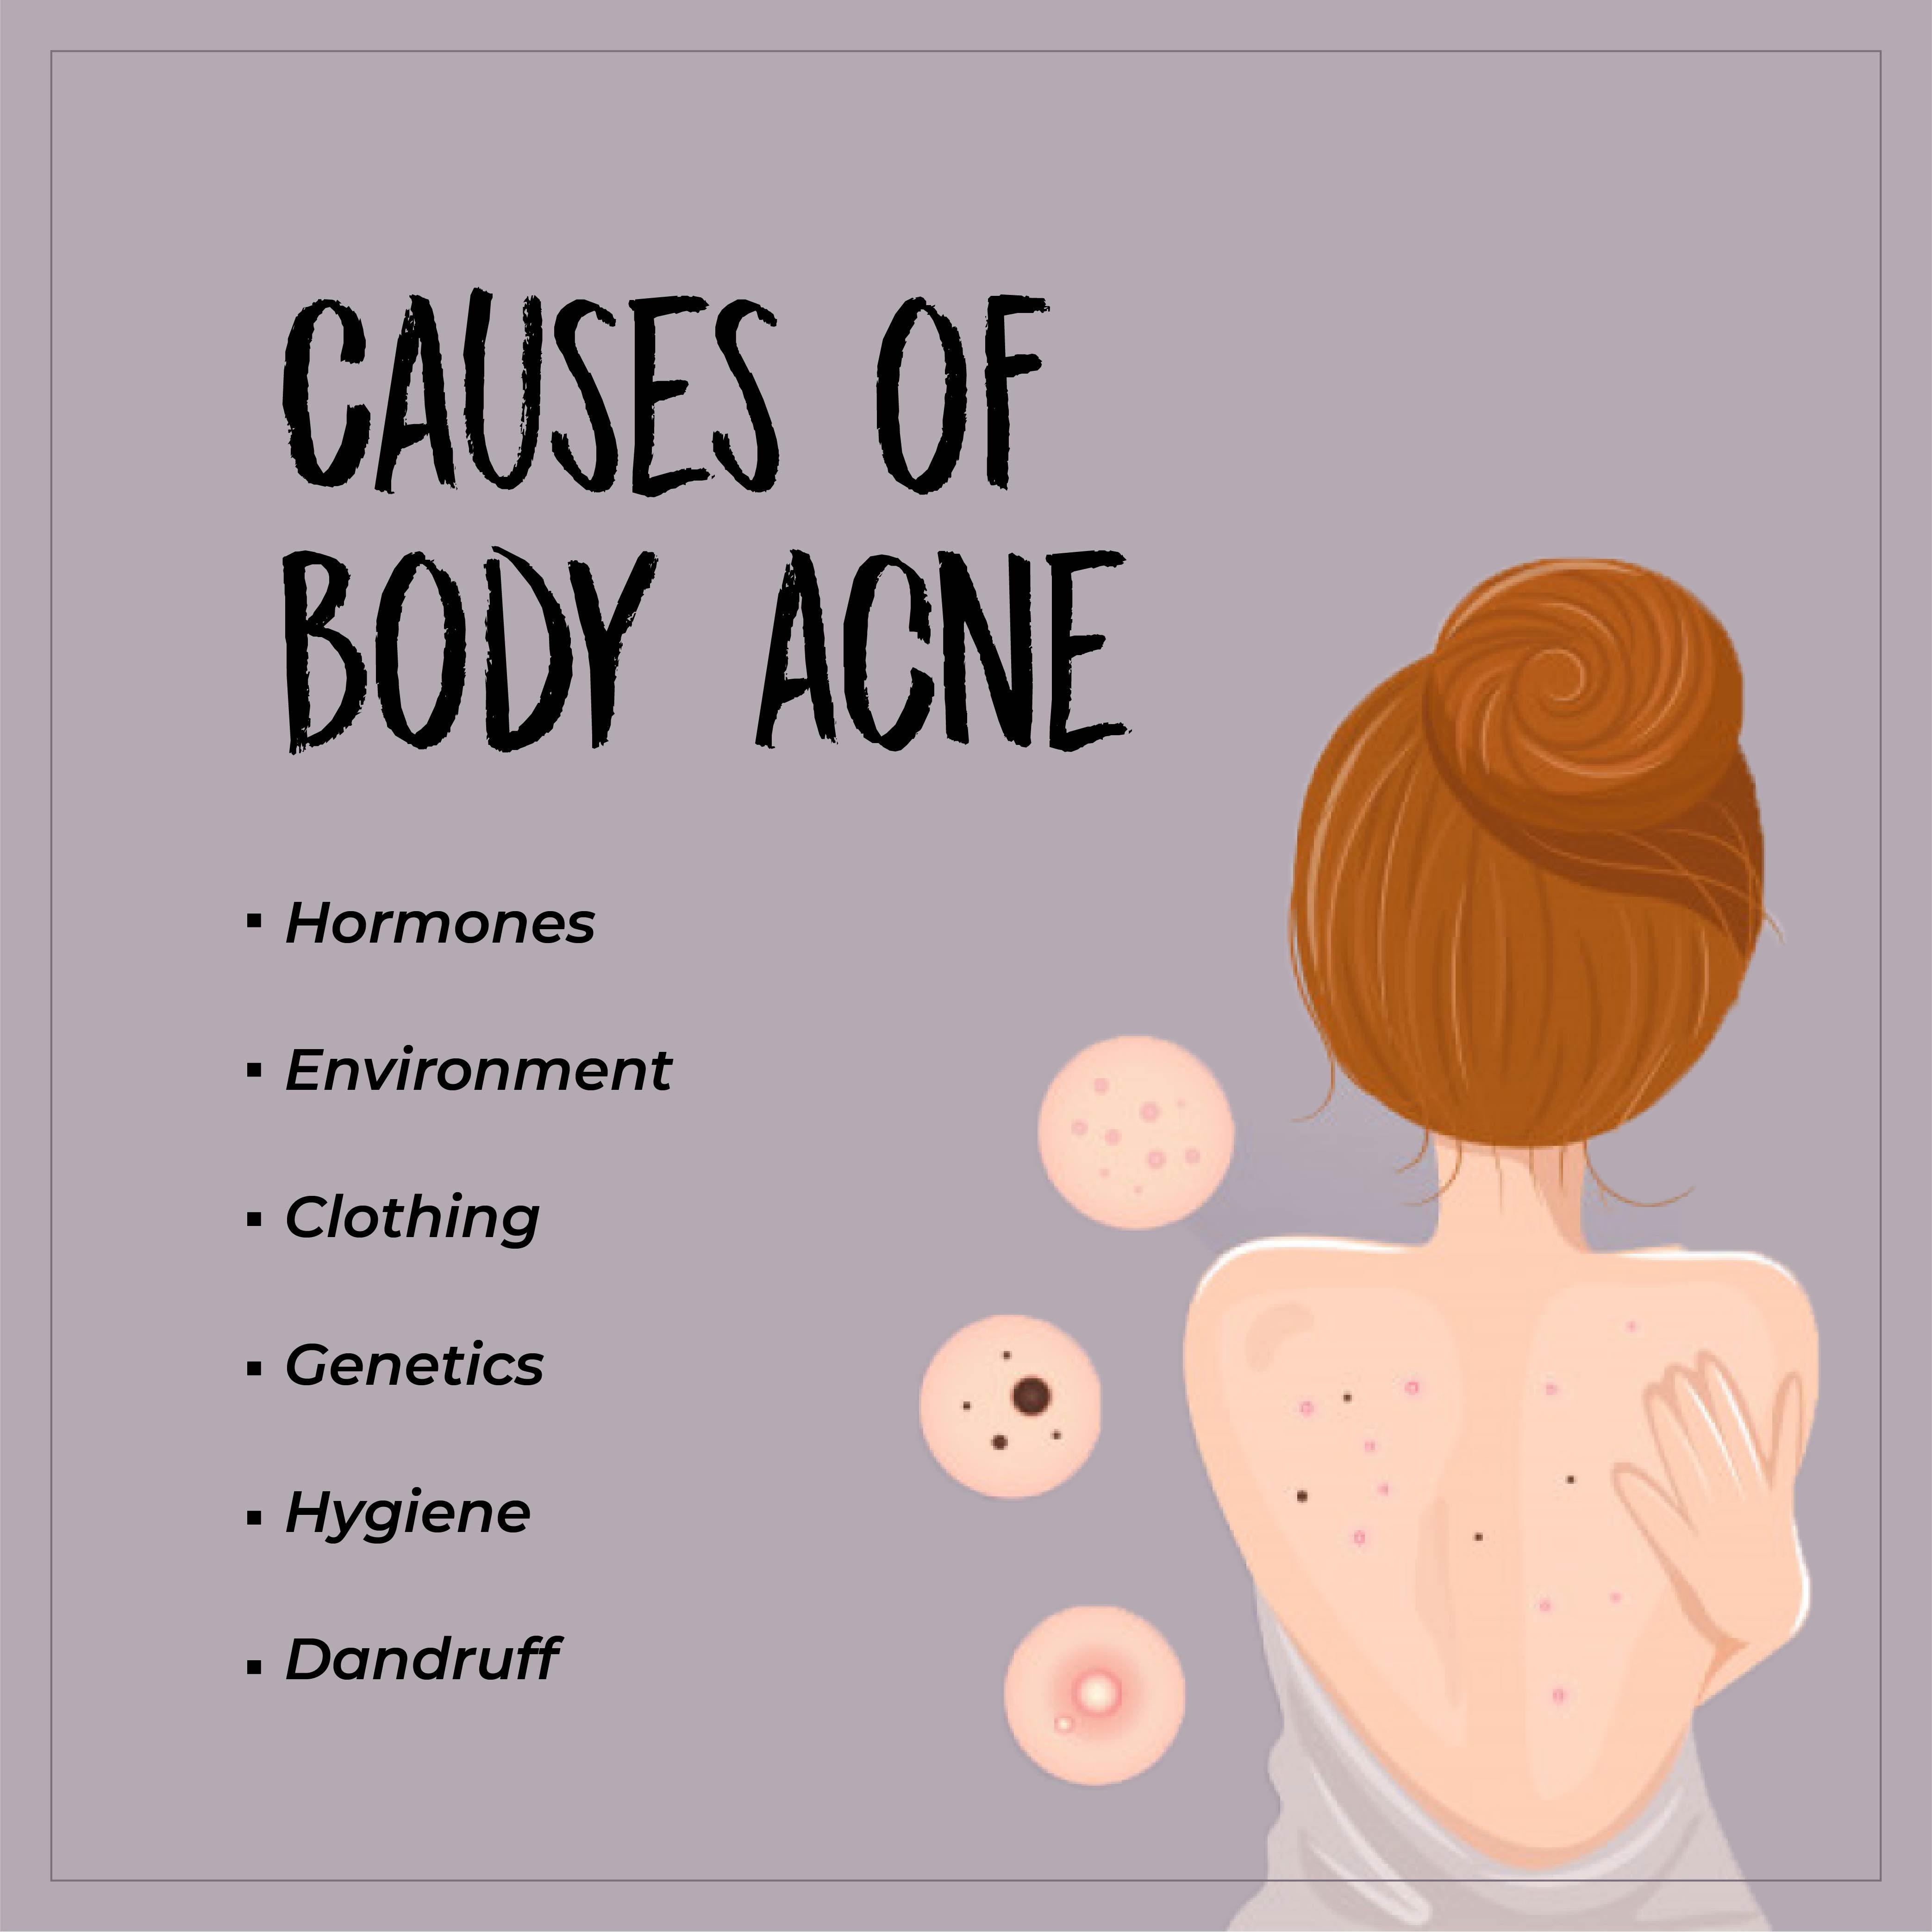 This is an image of the causes of body acne